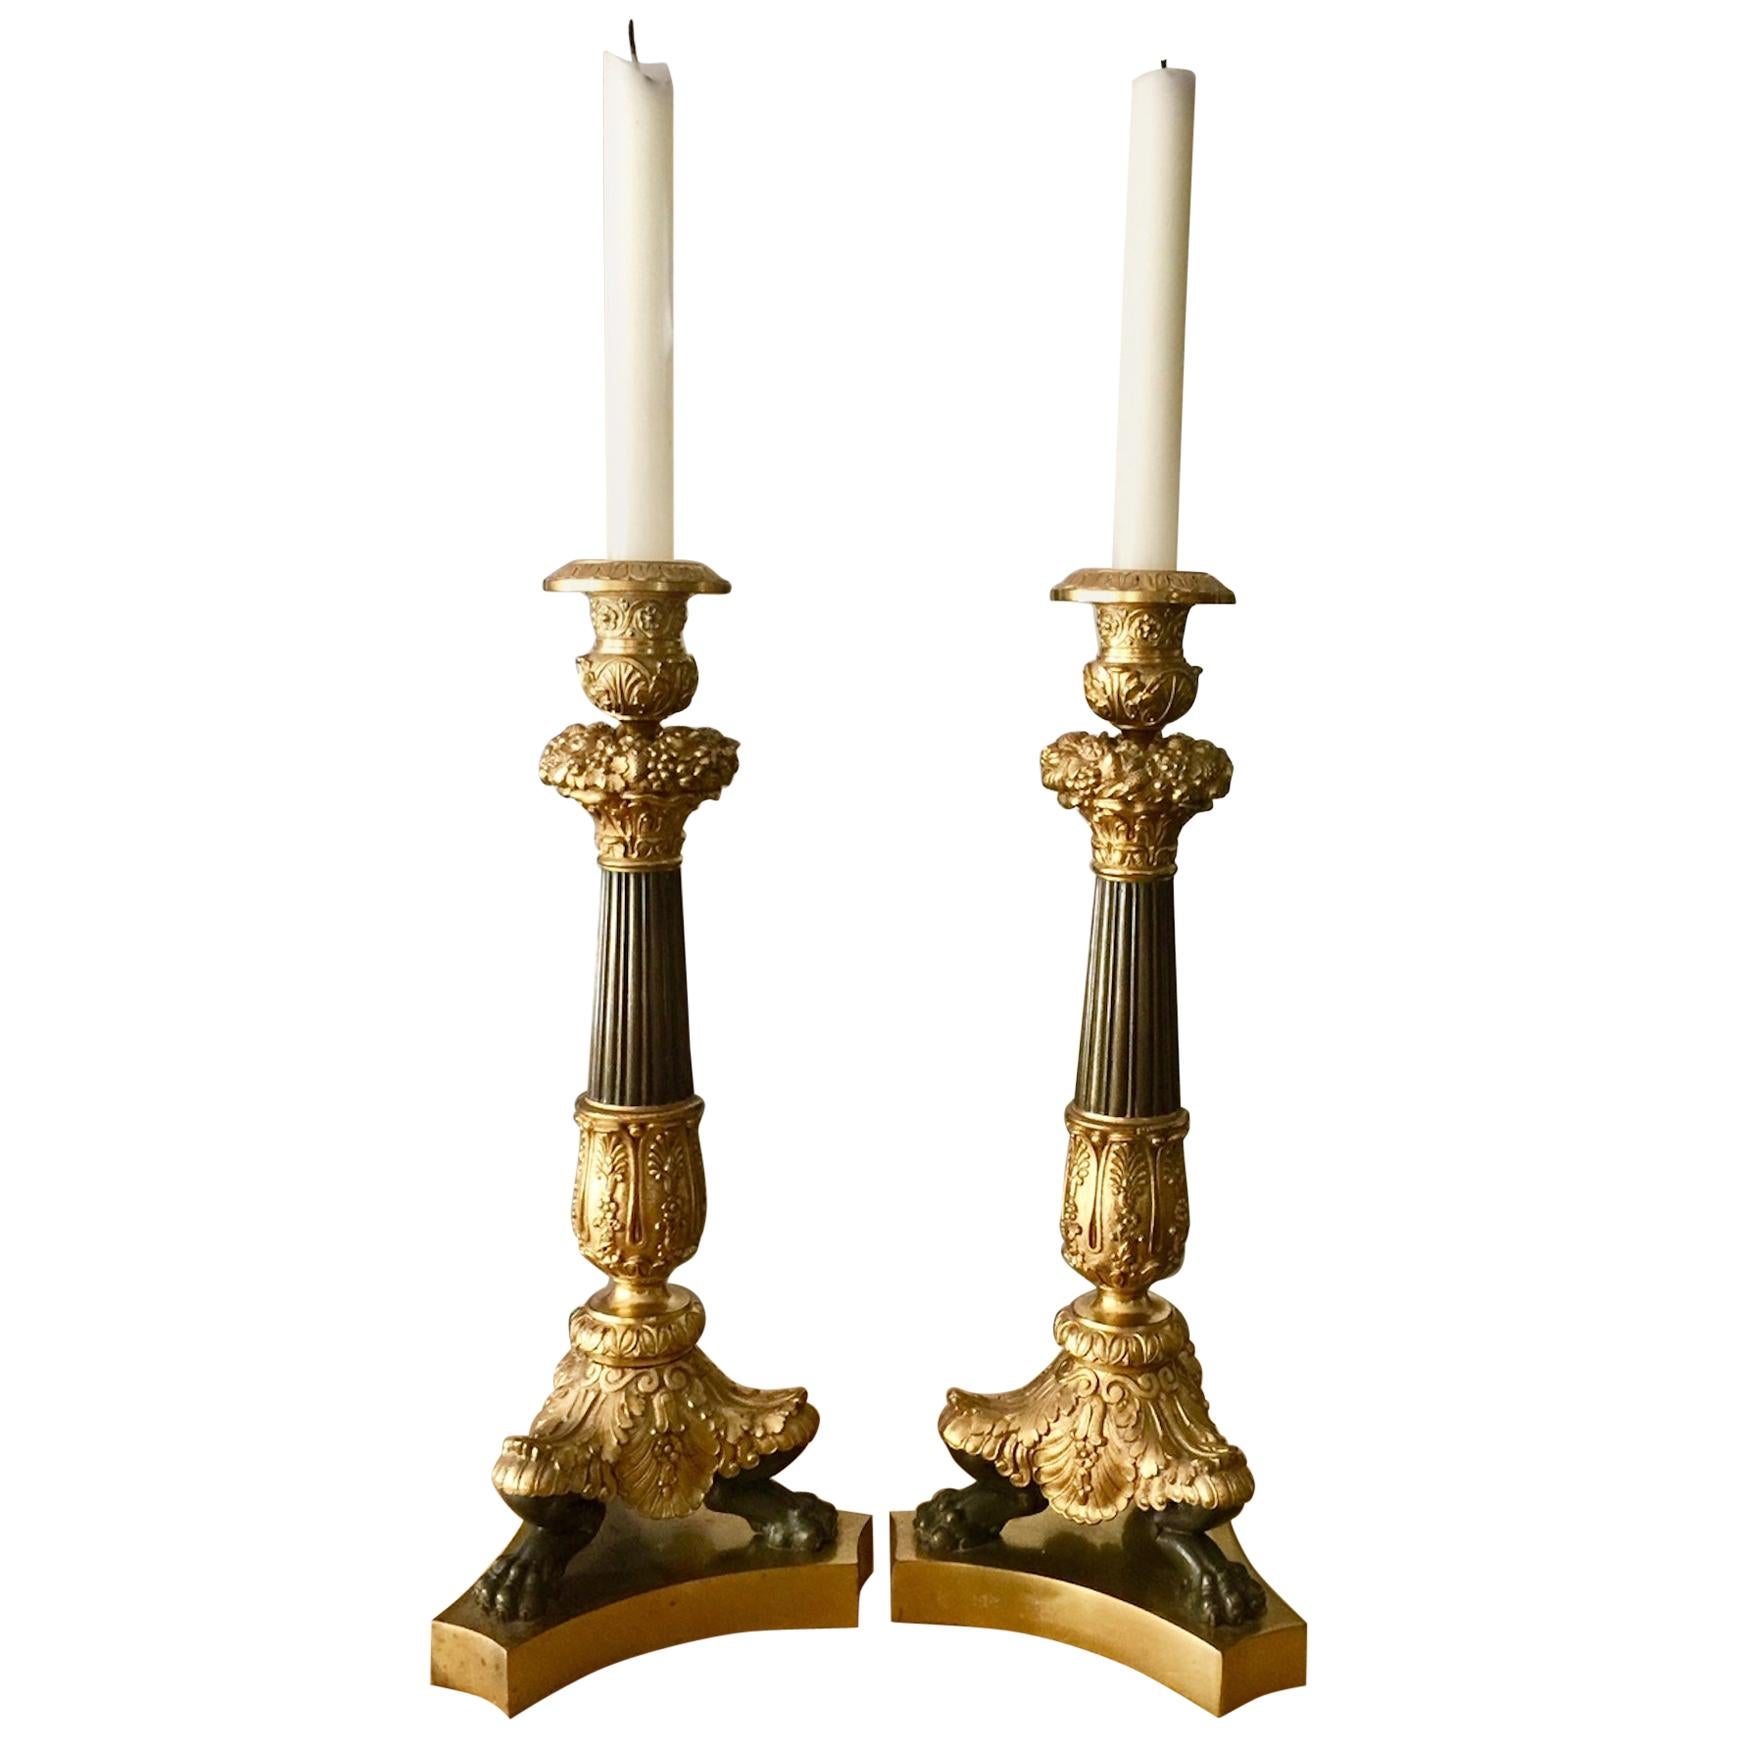 French Pair of Tall Bronze Neoclassical Empire Style Candlesticks